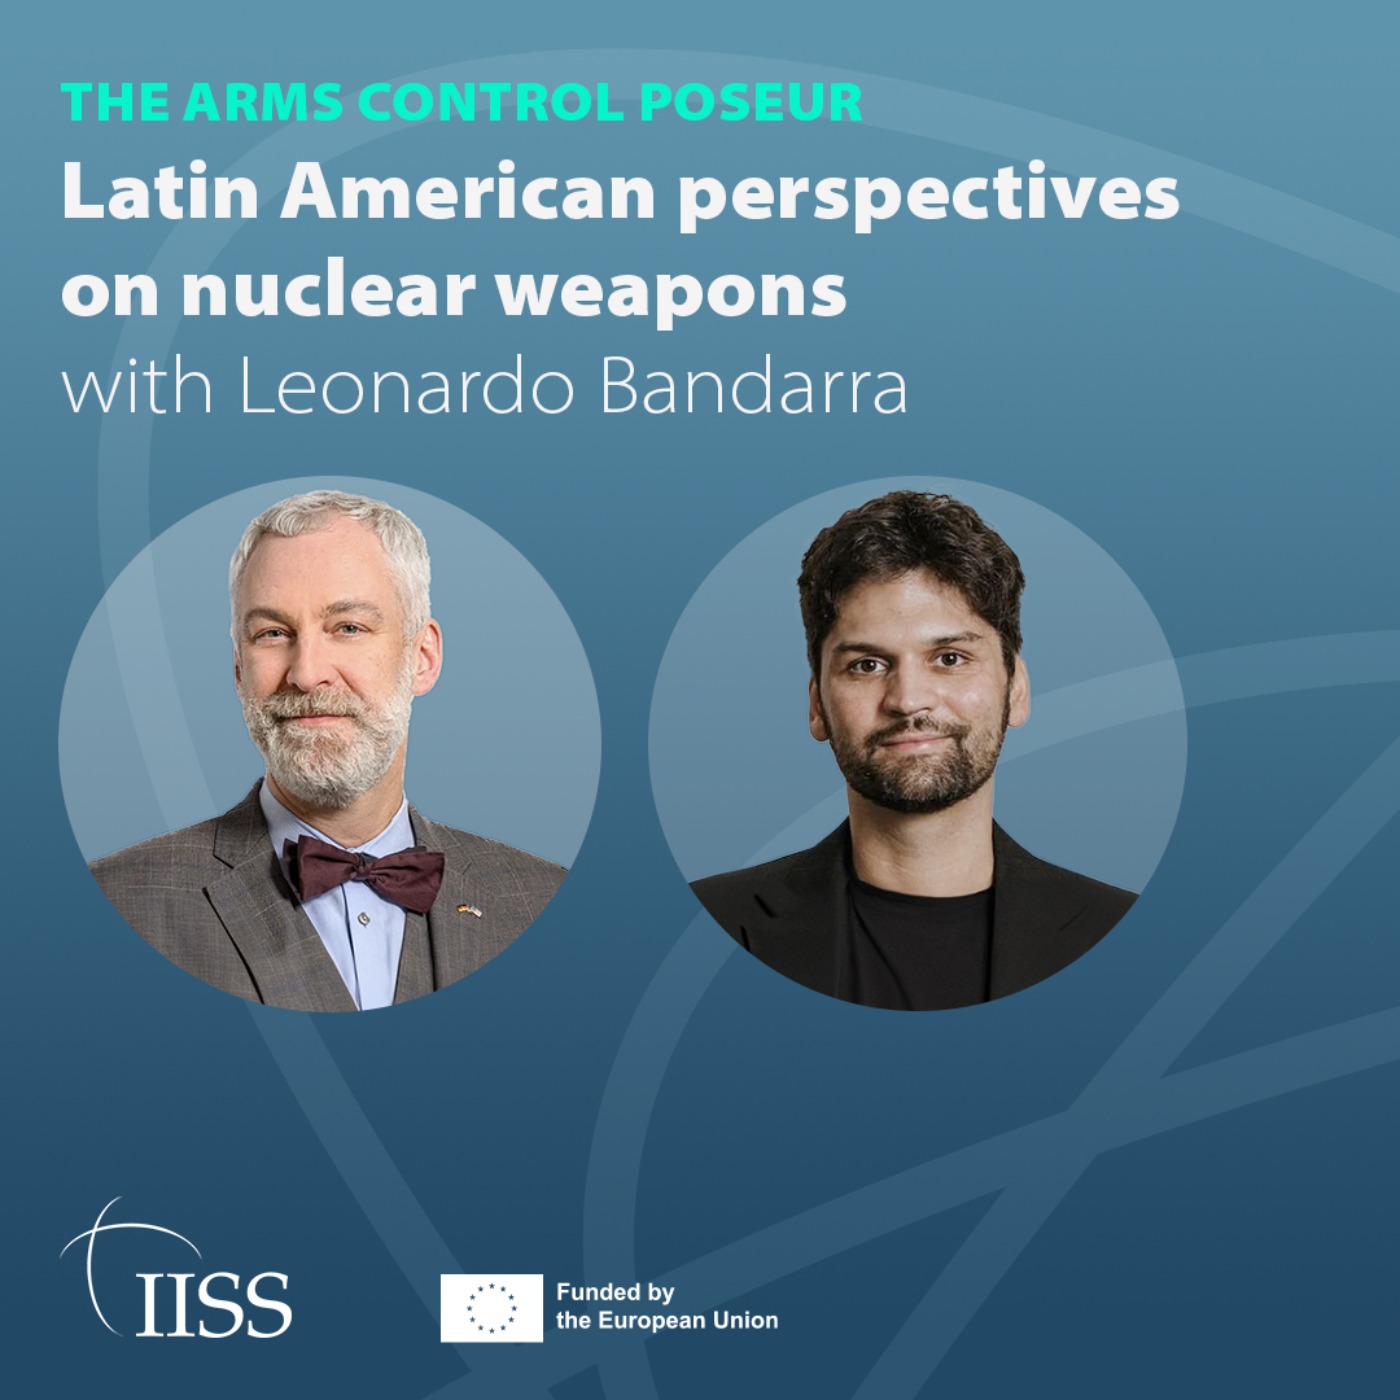 Latin American perspectives on nuclear weapons politics with Leonardo Bandarra